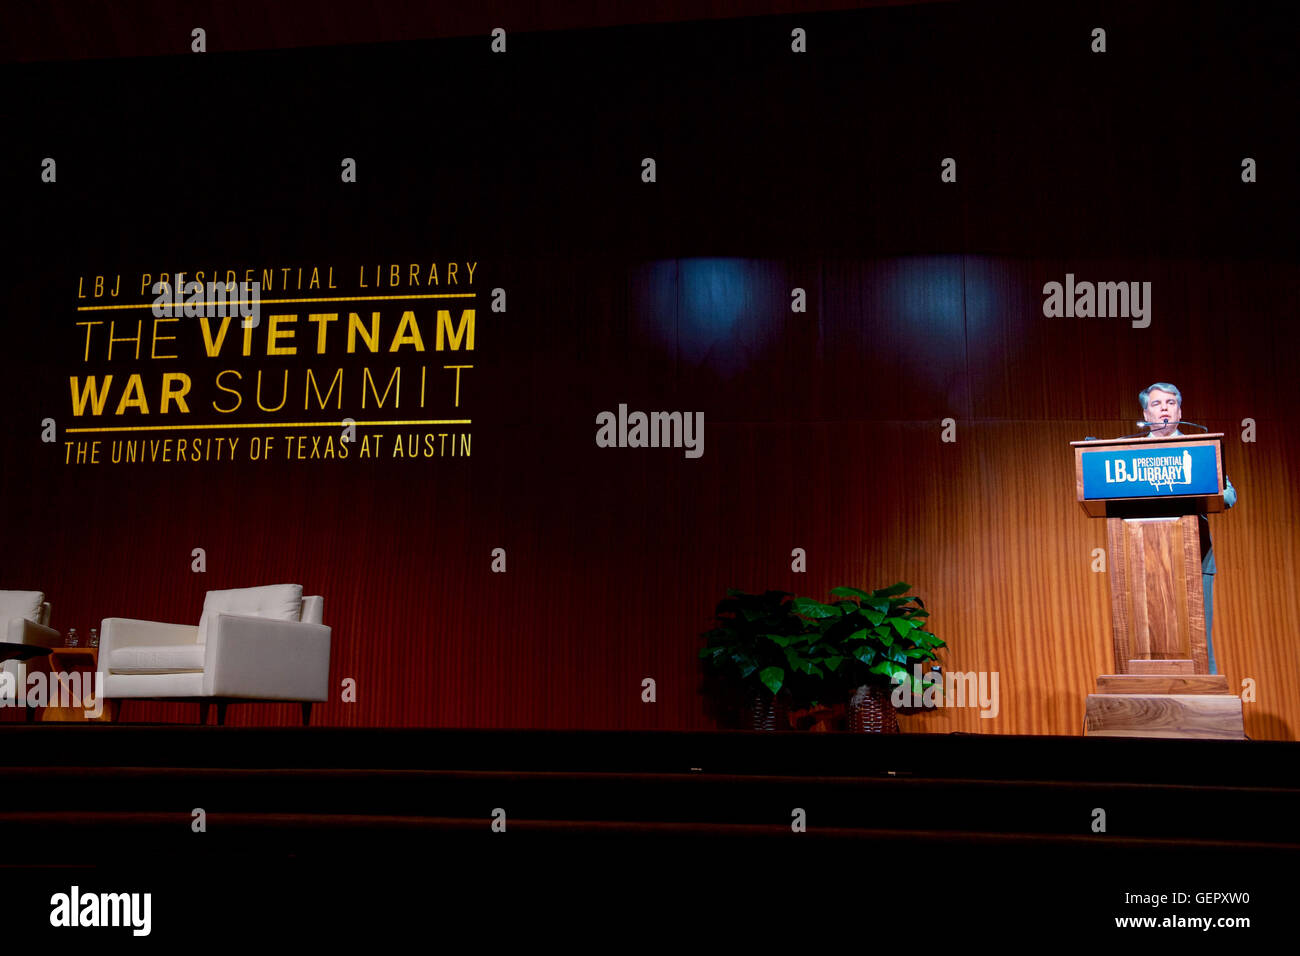 University of Texas at Austin President Fences Begins the Introductions Before Secretary Kerry Delivers a Speech About the Past and Future of the U.S.-Vietnam Relationship at the Vietnam War Summit at the LBJ Presidential Library Stock Photo